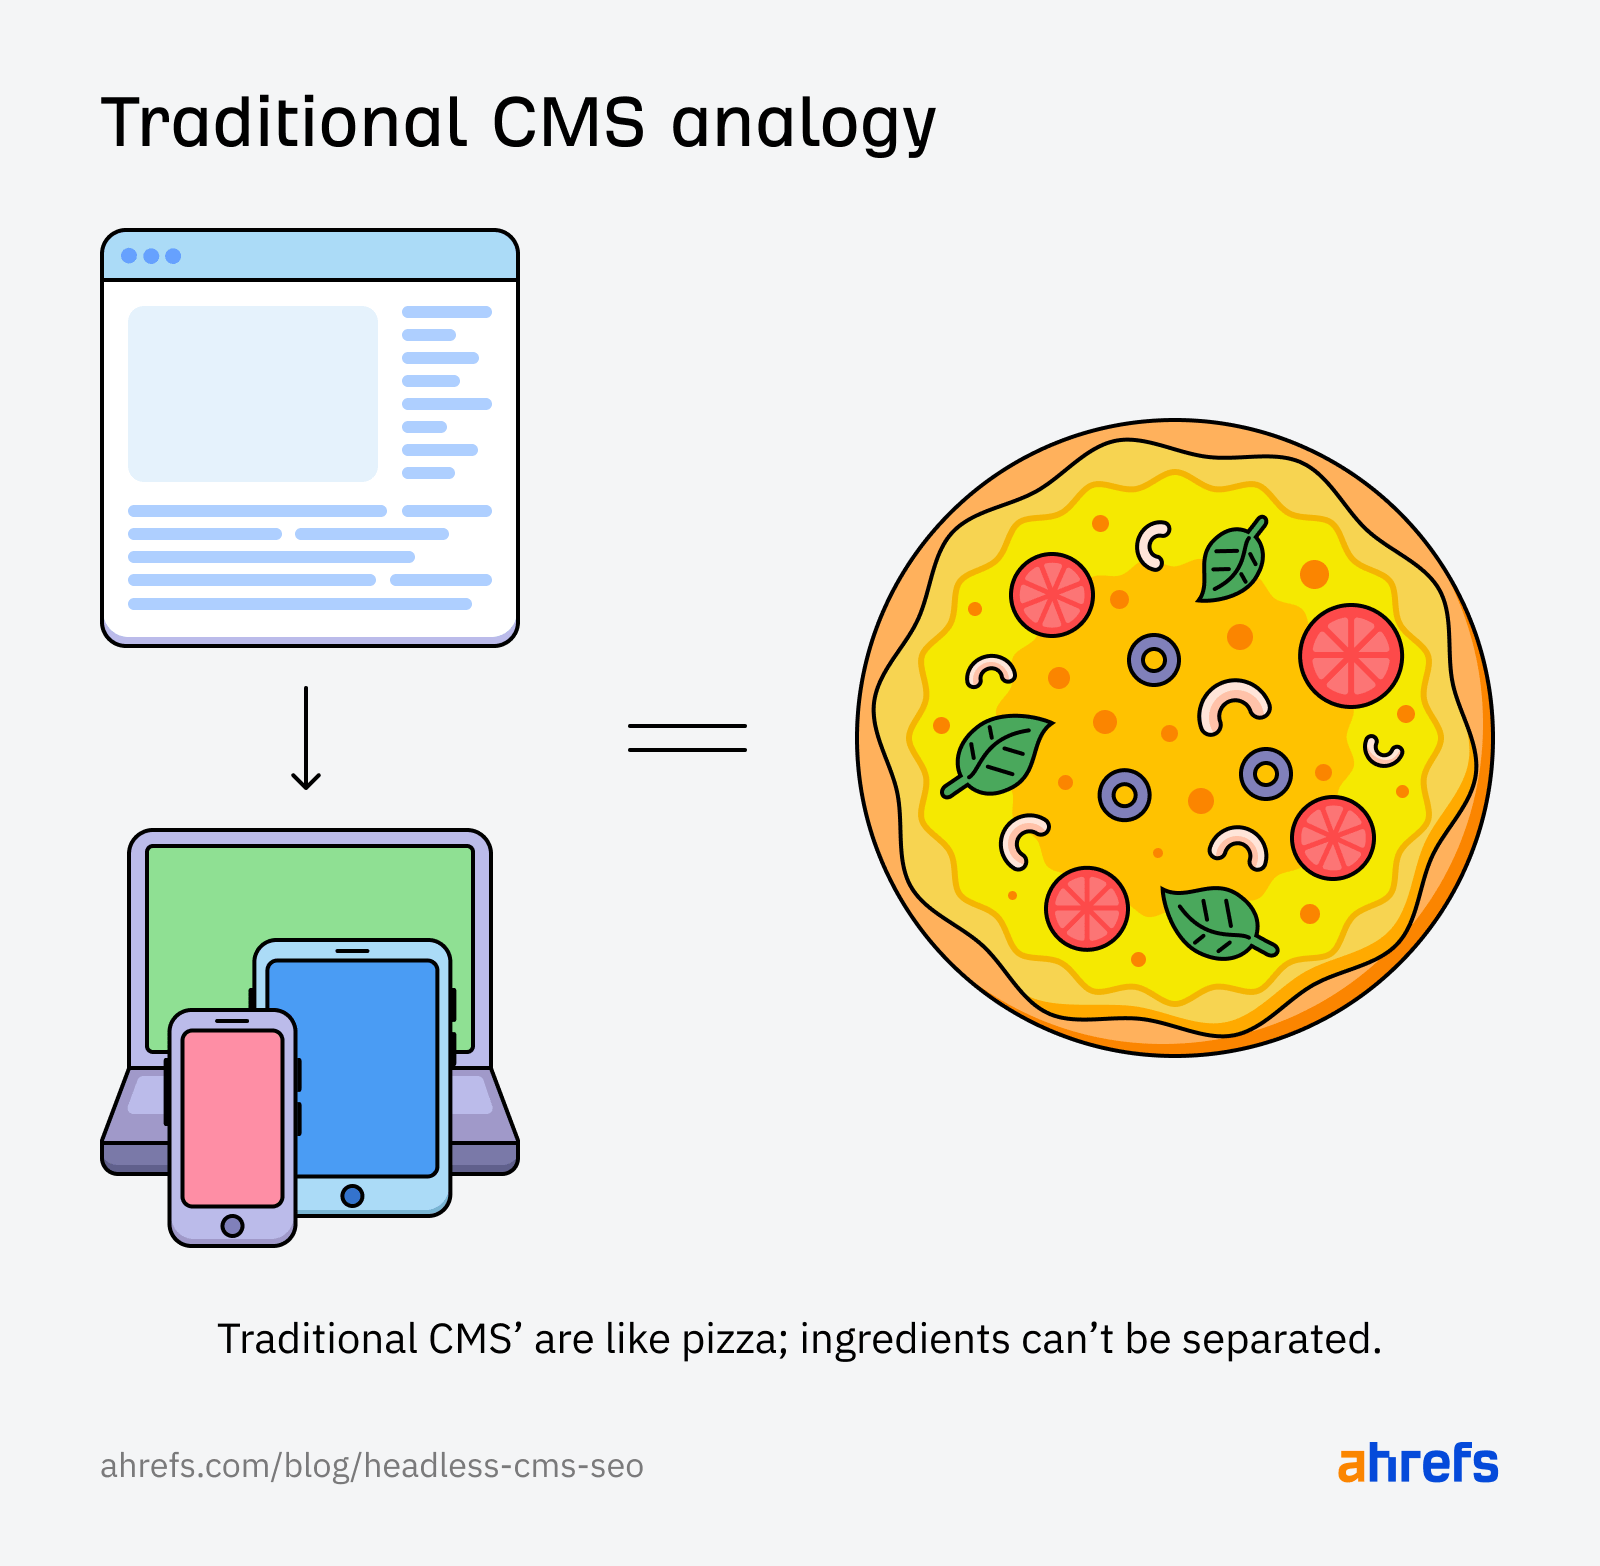 analogy-of-how-a-traditional-cms-works